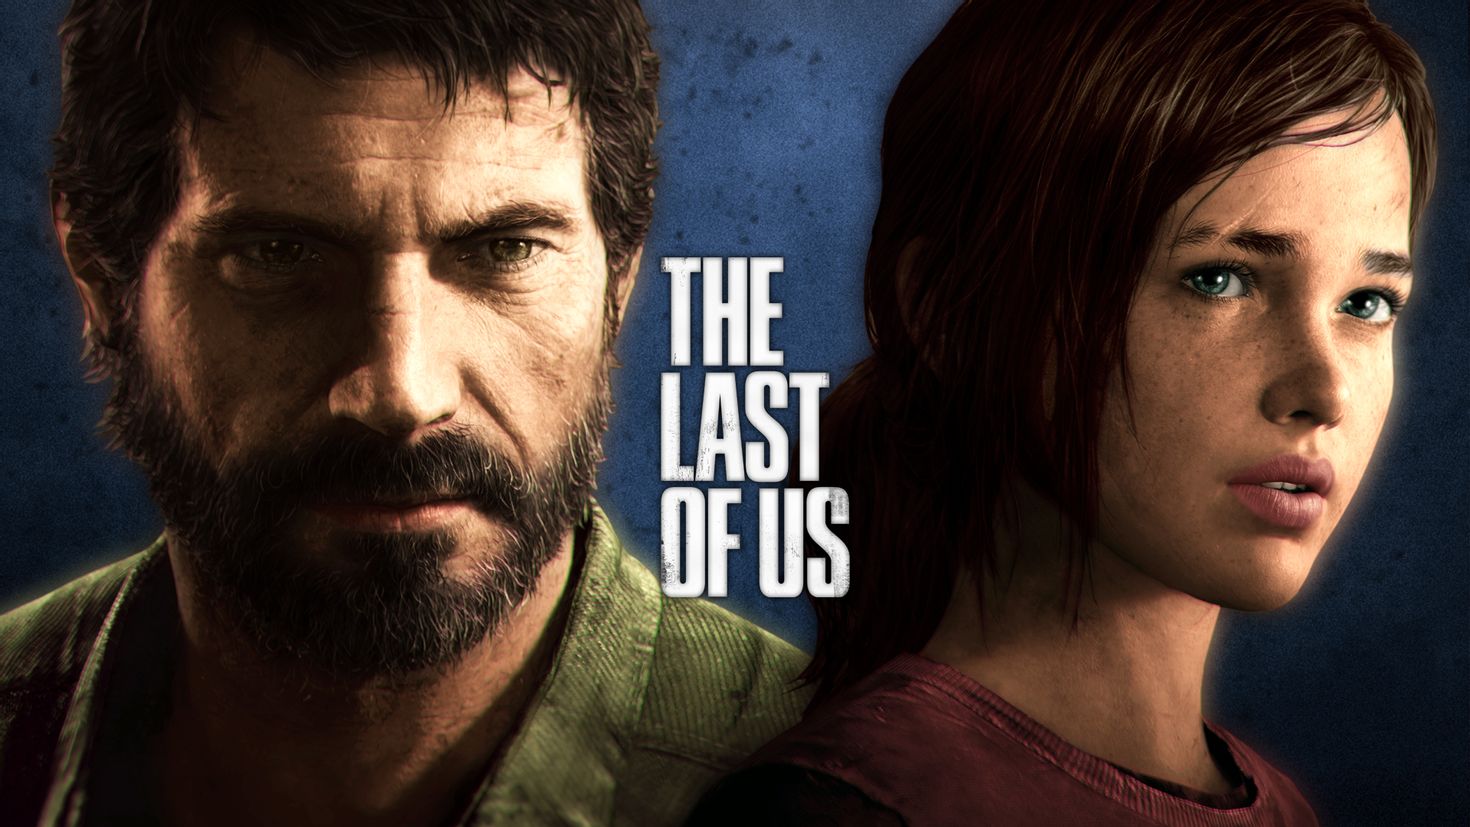 Зеласт гейм. The last of us. The last of us 1. The last of us игра.